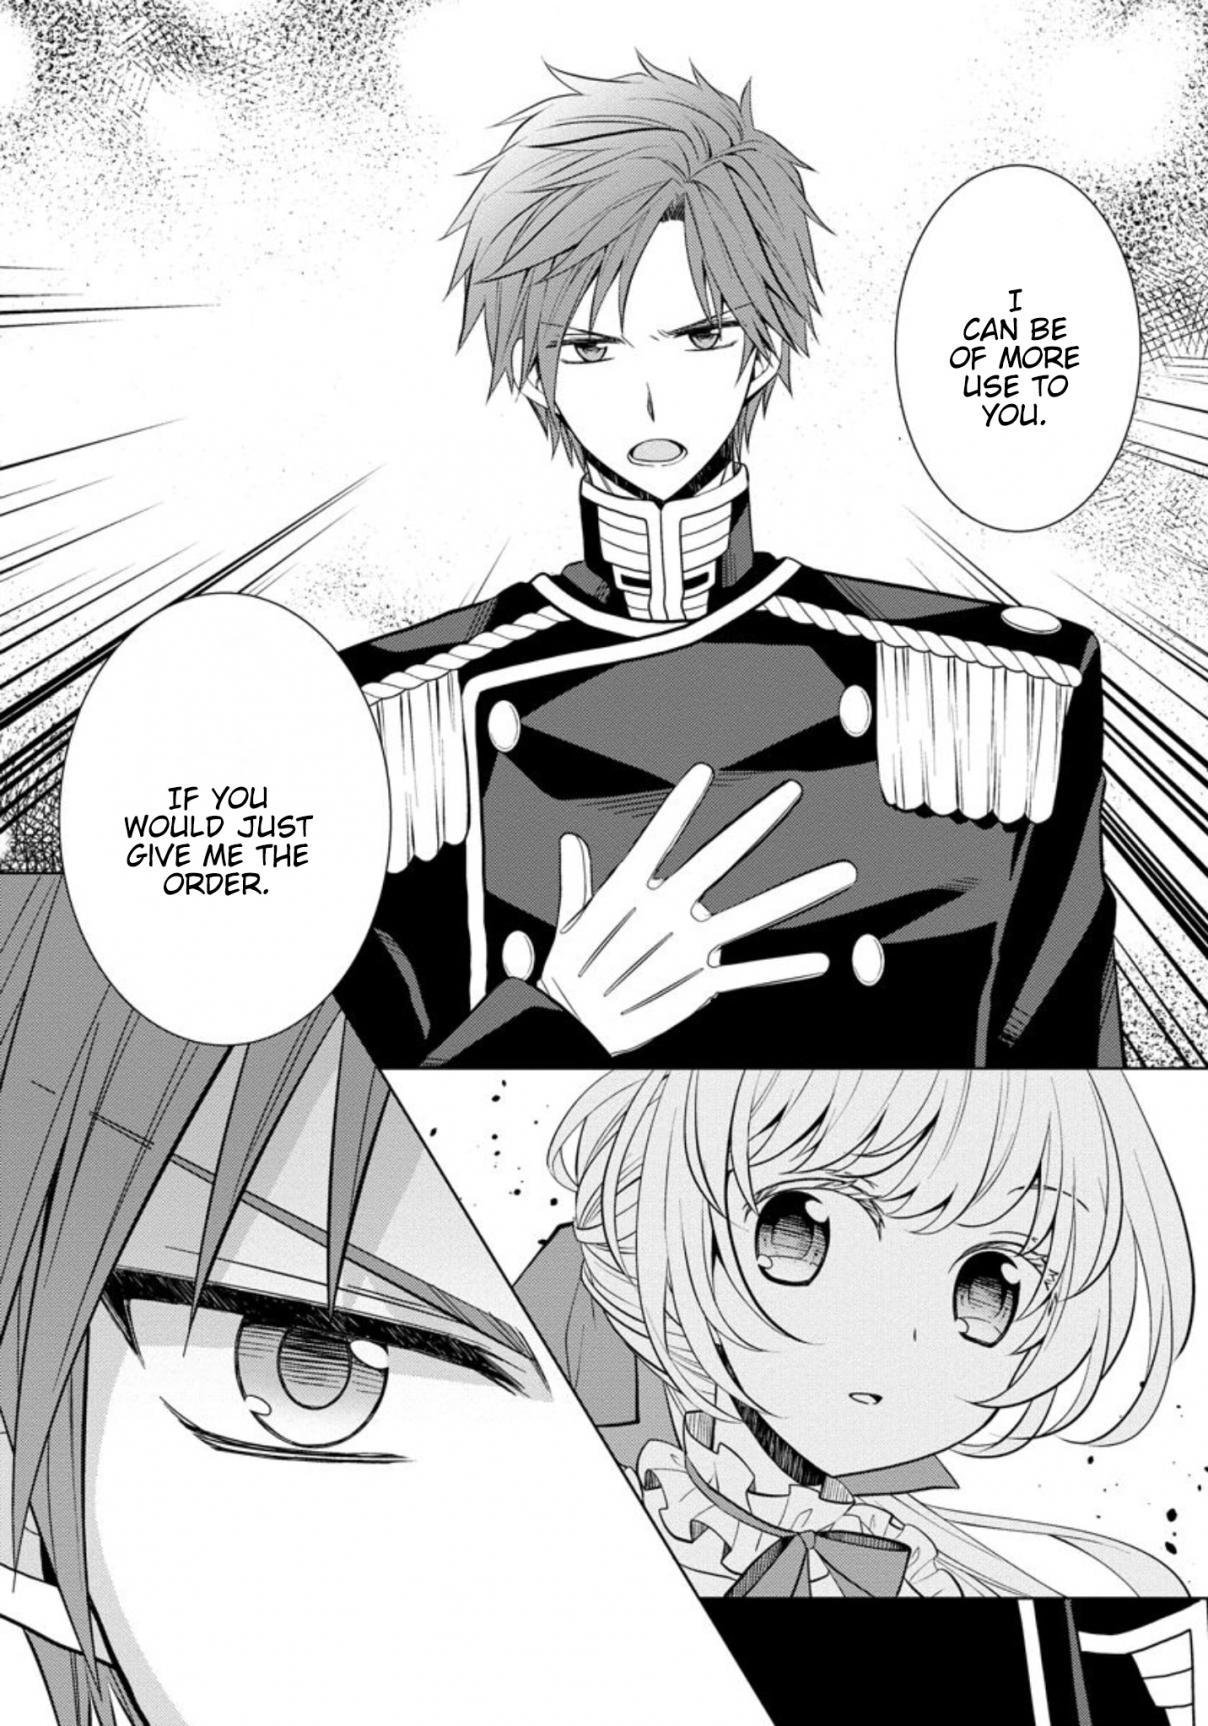 The Reincarnated Princess Strikes Down Flags Today as Well Vol. 1 Ch. 6